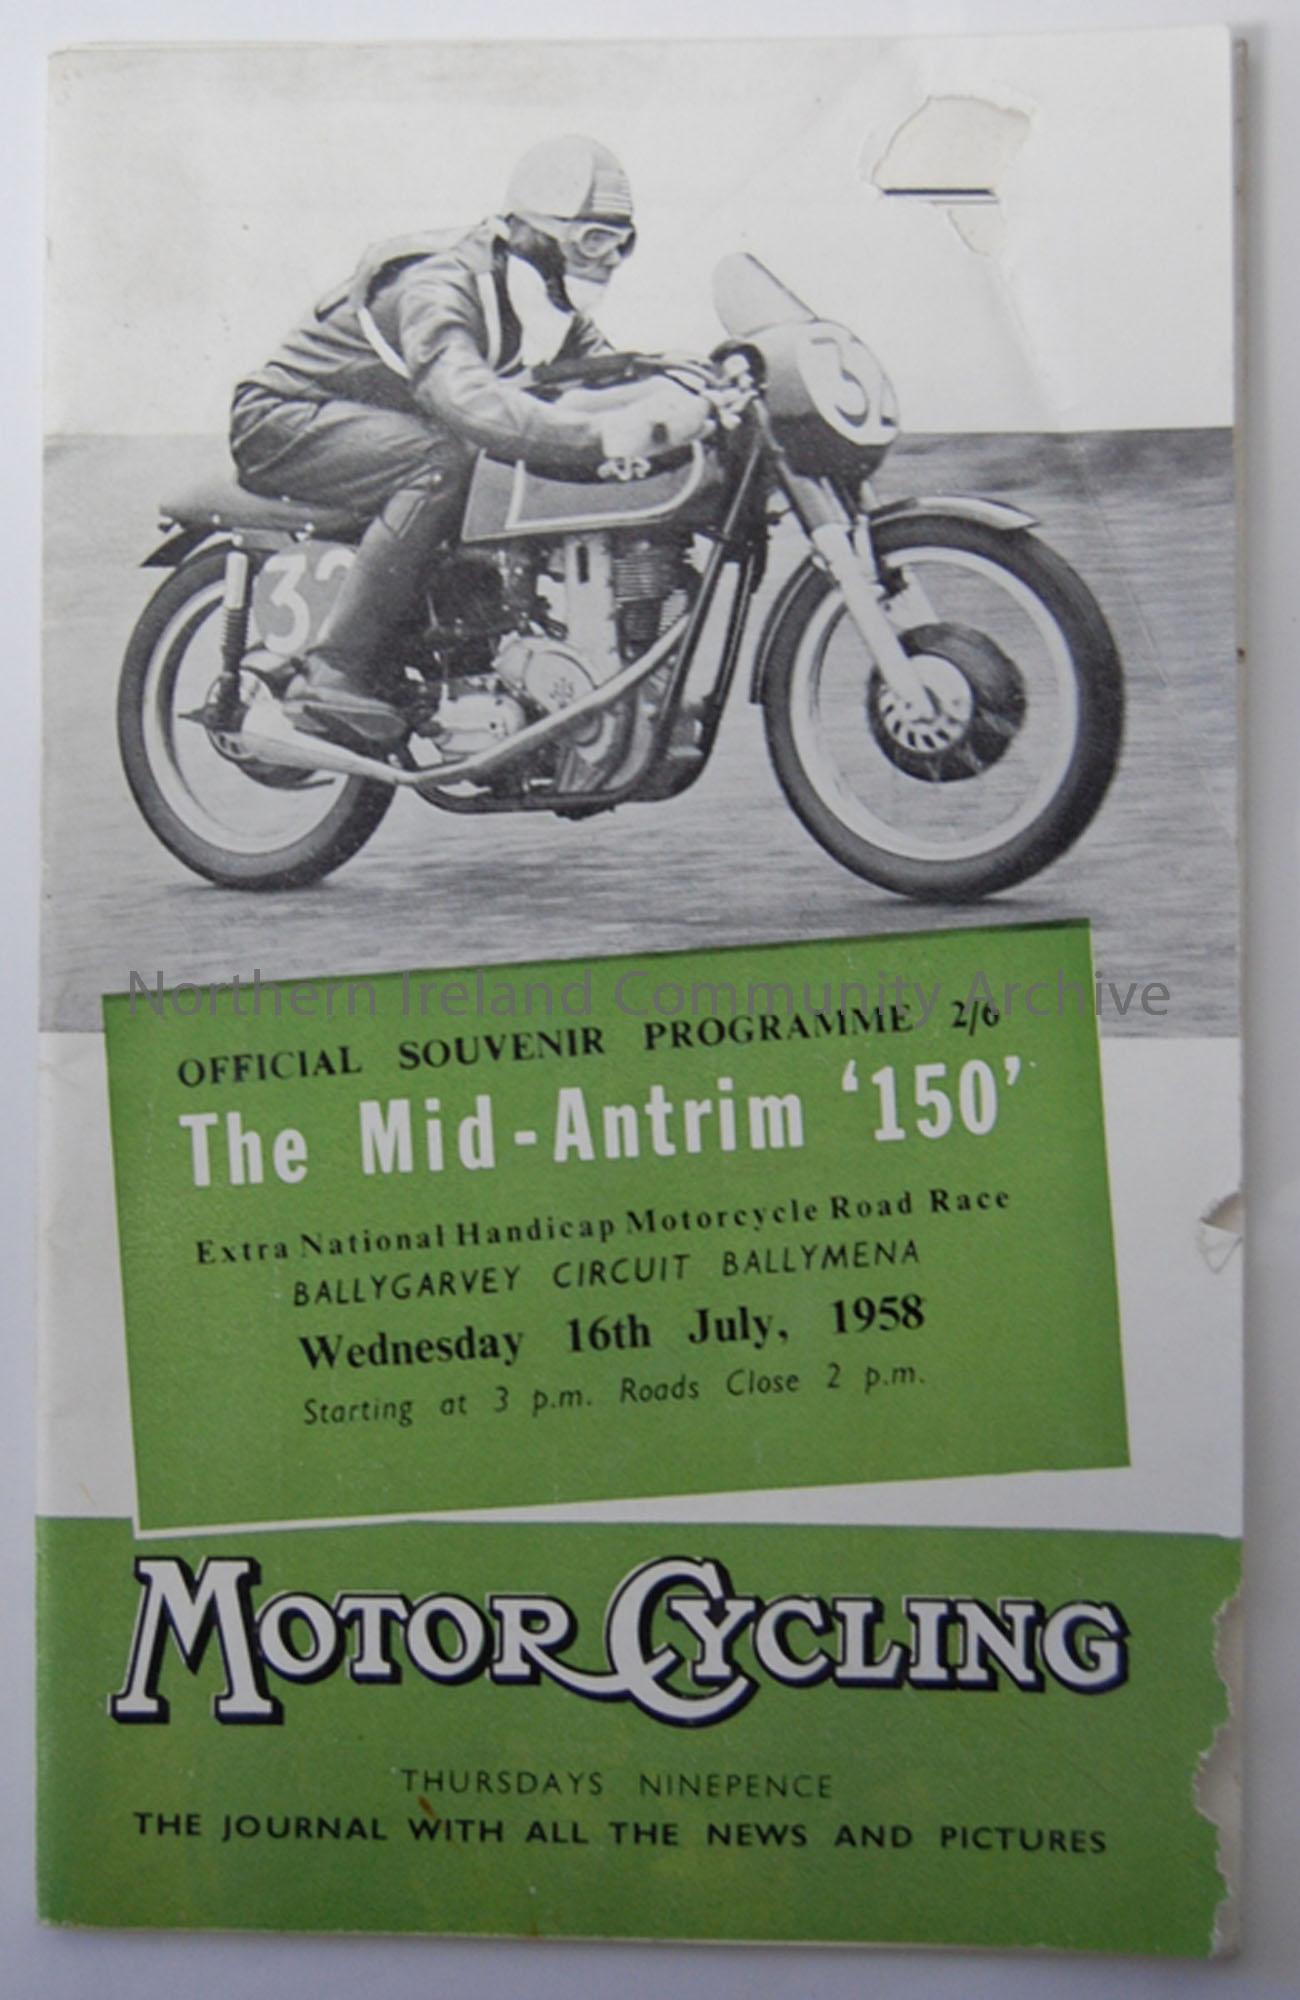 The Mid-Antrim ‘150’ Motorcycle road race, Wednesday 16th July 1958, starting at 3pm, Ballygarvey circuit, Ballymena.